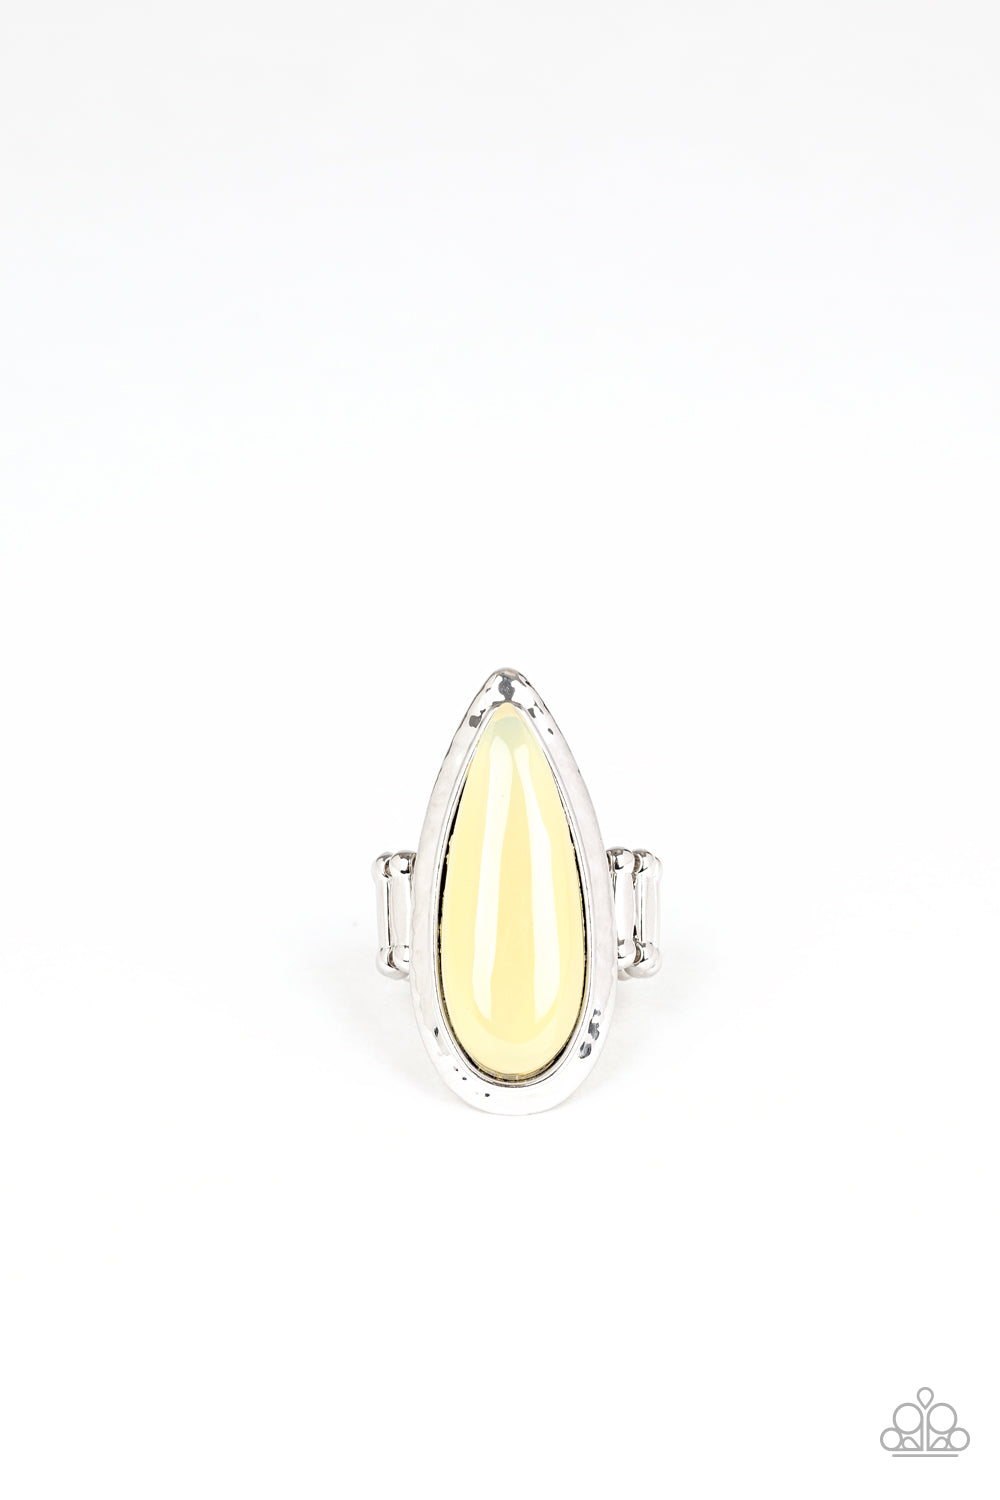 Opal Oasis - Yellow ring